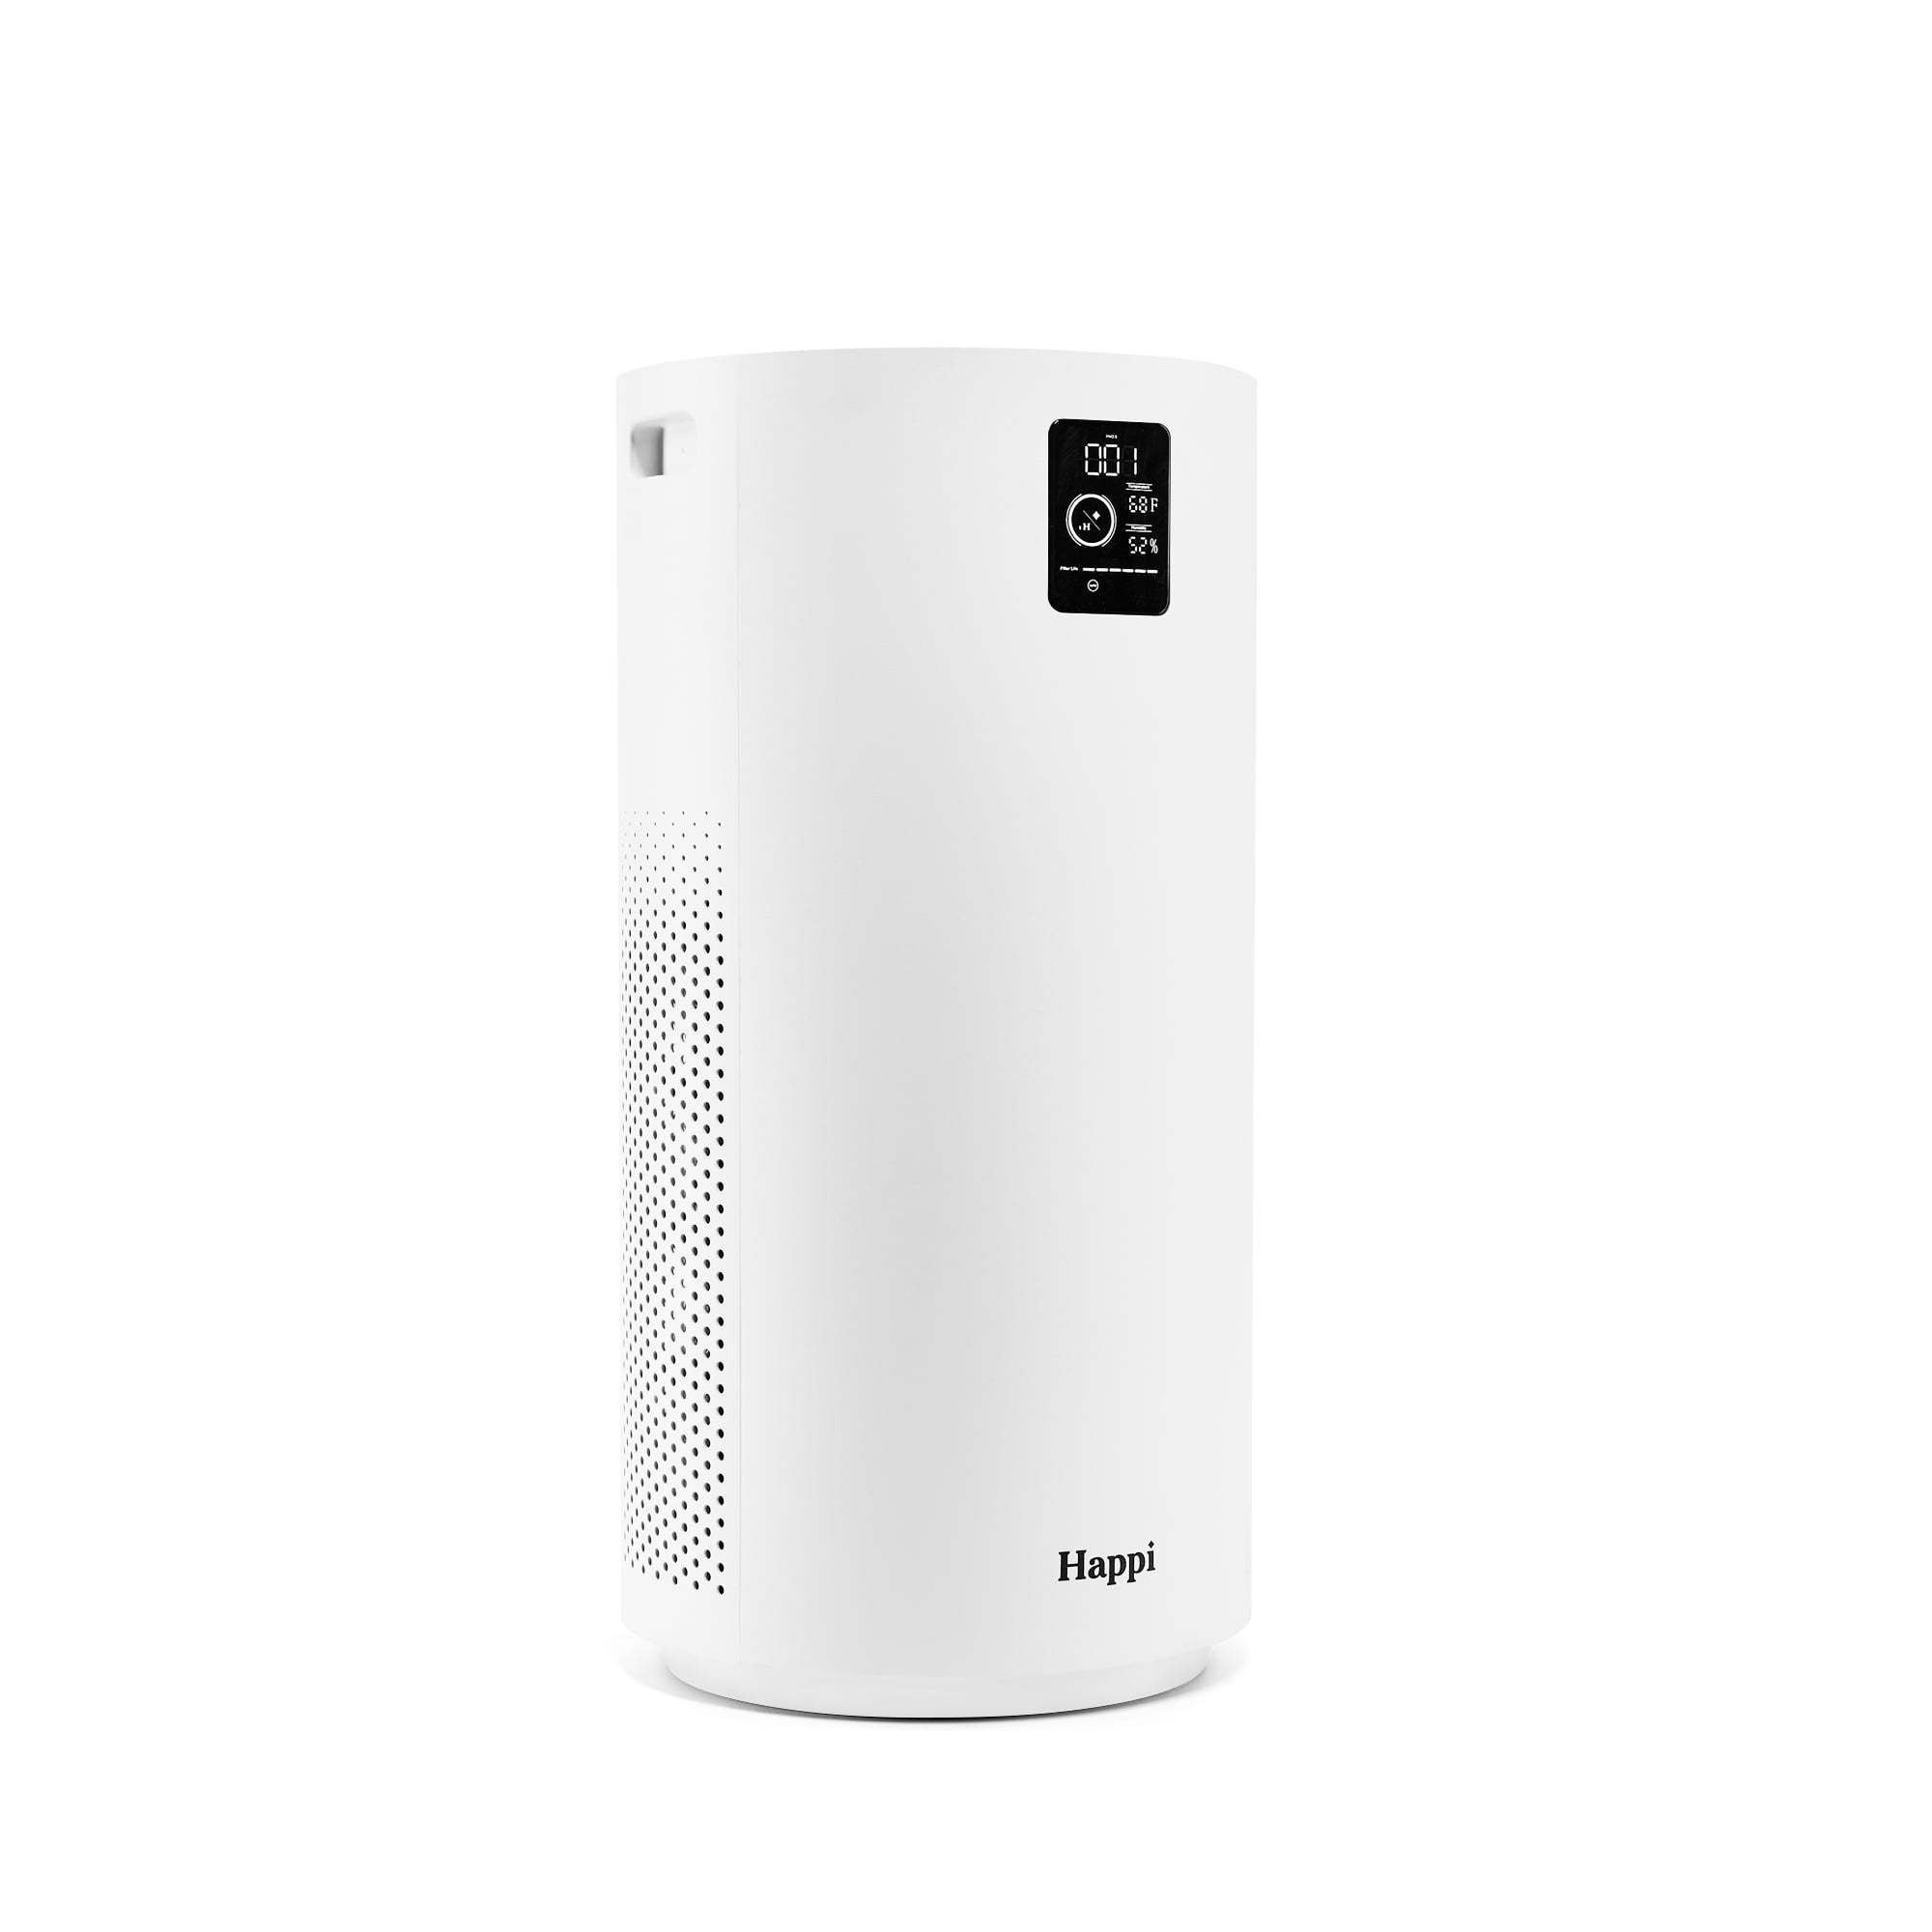 Our Happi Air Purifier for Large Rooms, LED Air Particle Display Screen,  Self-Cleaning Technology, 5 in 1 Filter, UV & Active Carbon Layers, Whisper  